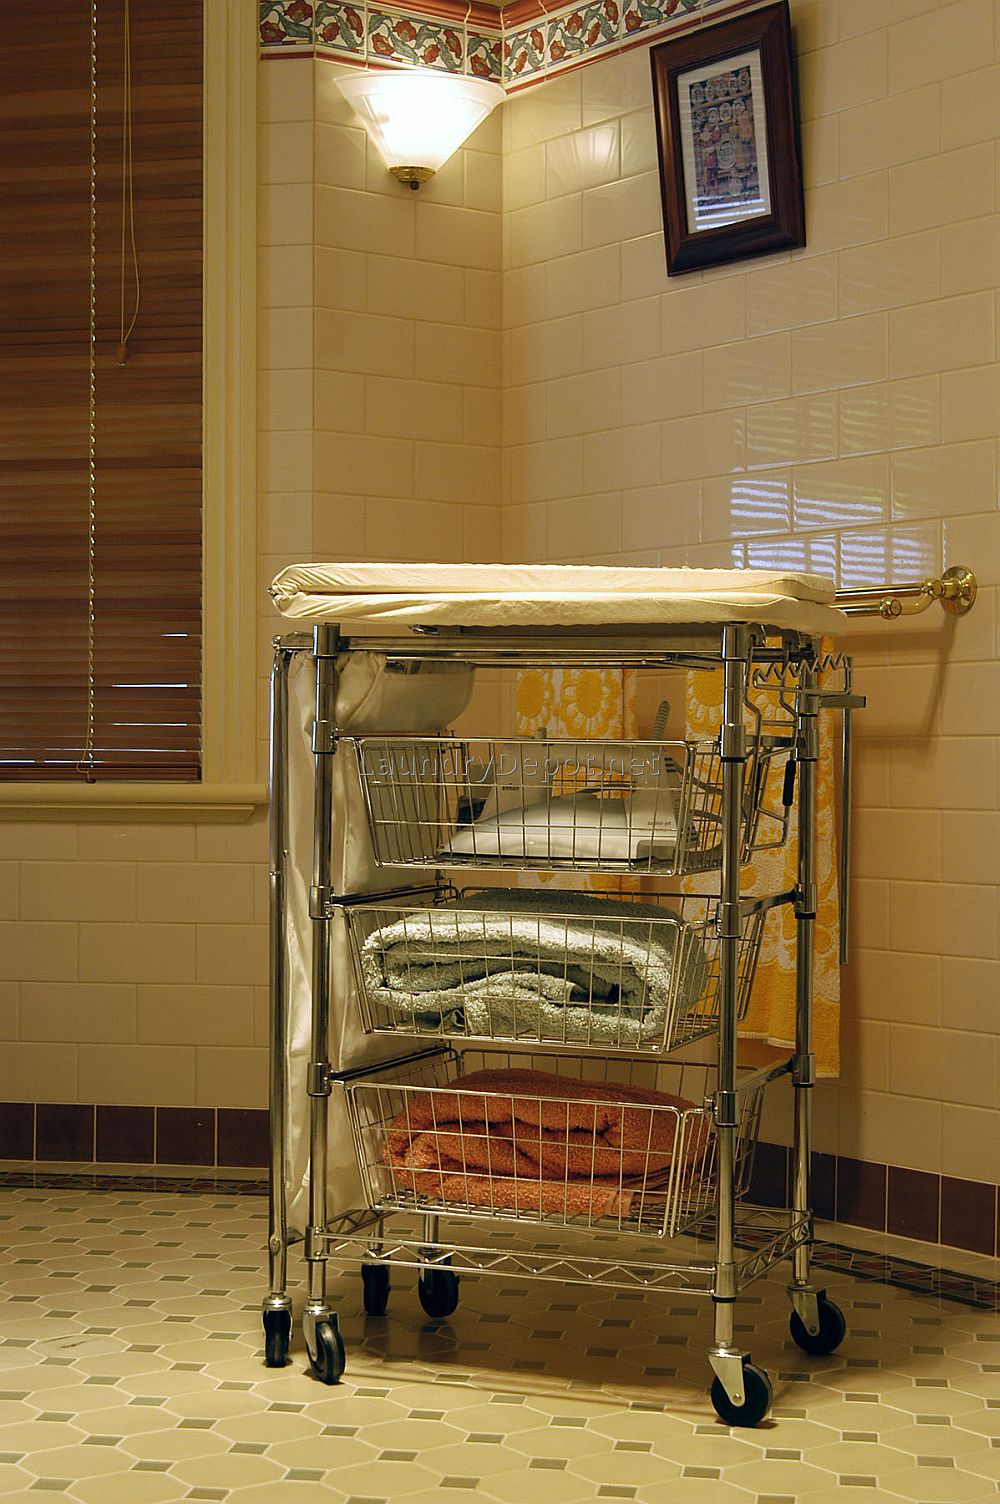 Smart-laundry-room-cart-can-also-easily-be-used-in-other-rooms